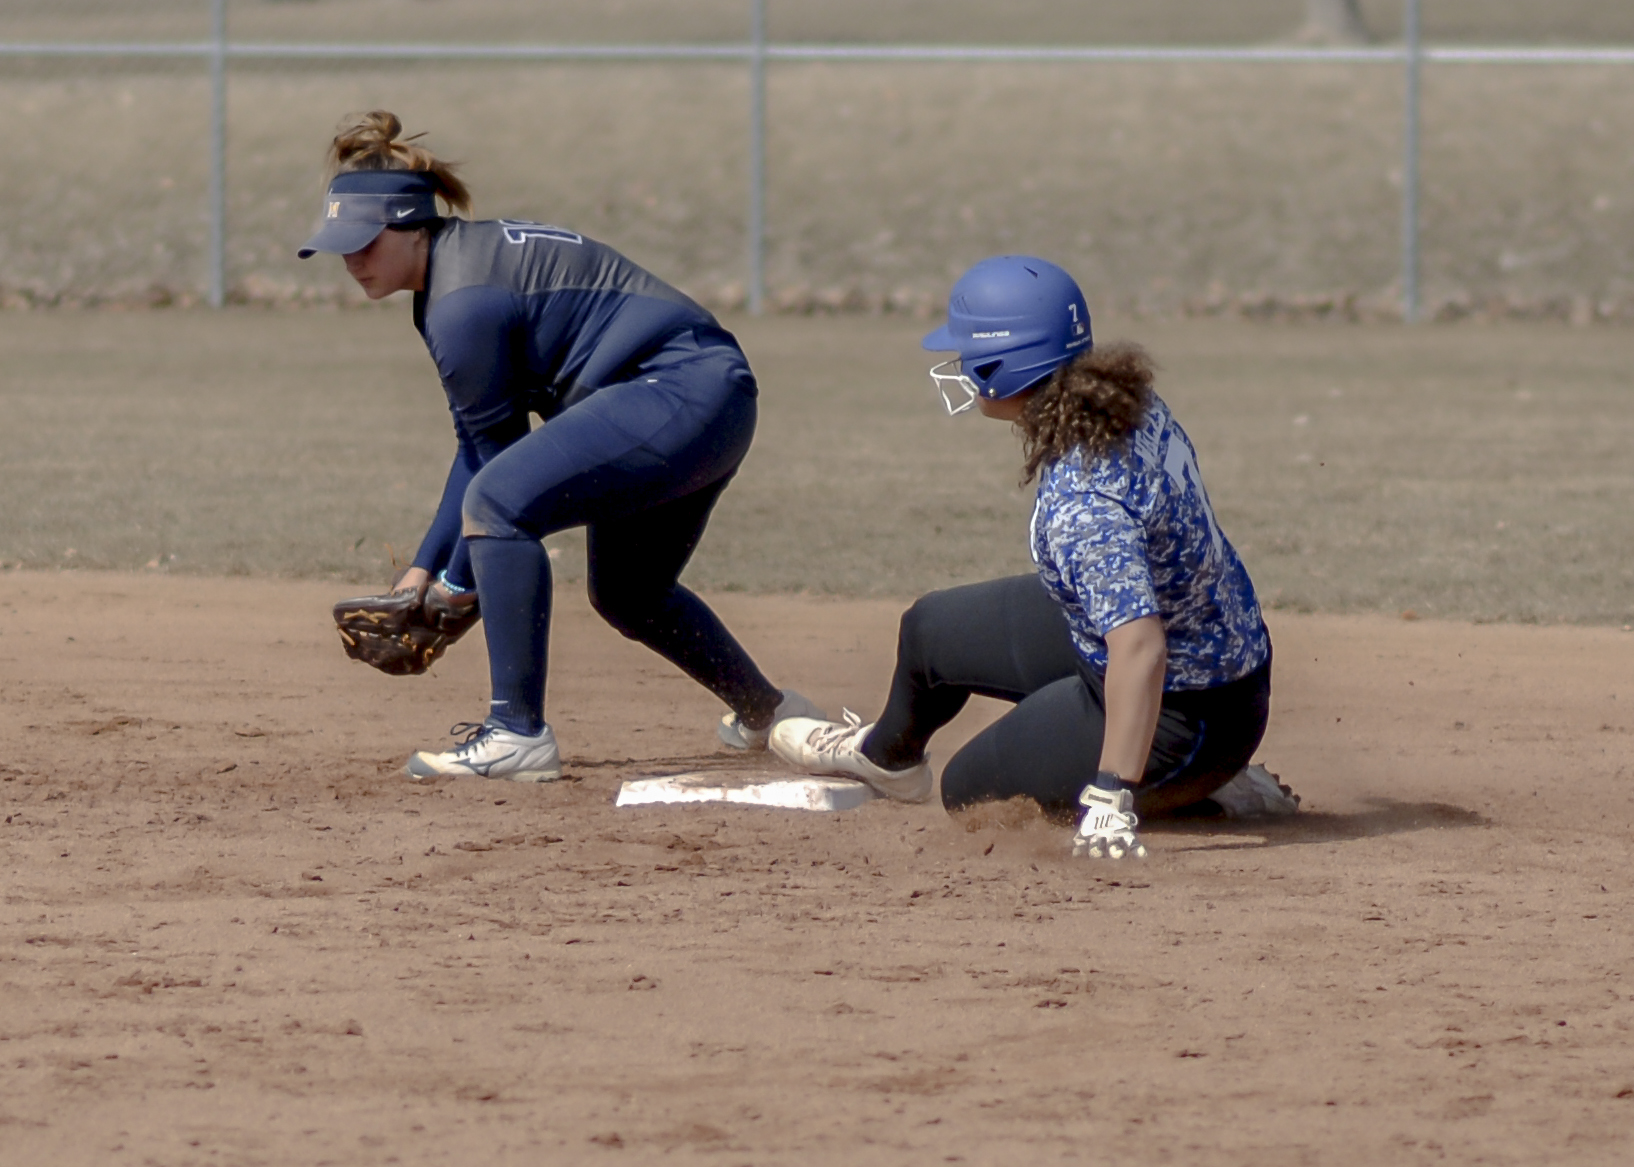 DMACC softball team sweeps doubleheader from SWCC